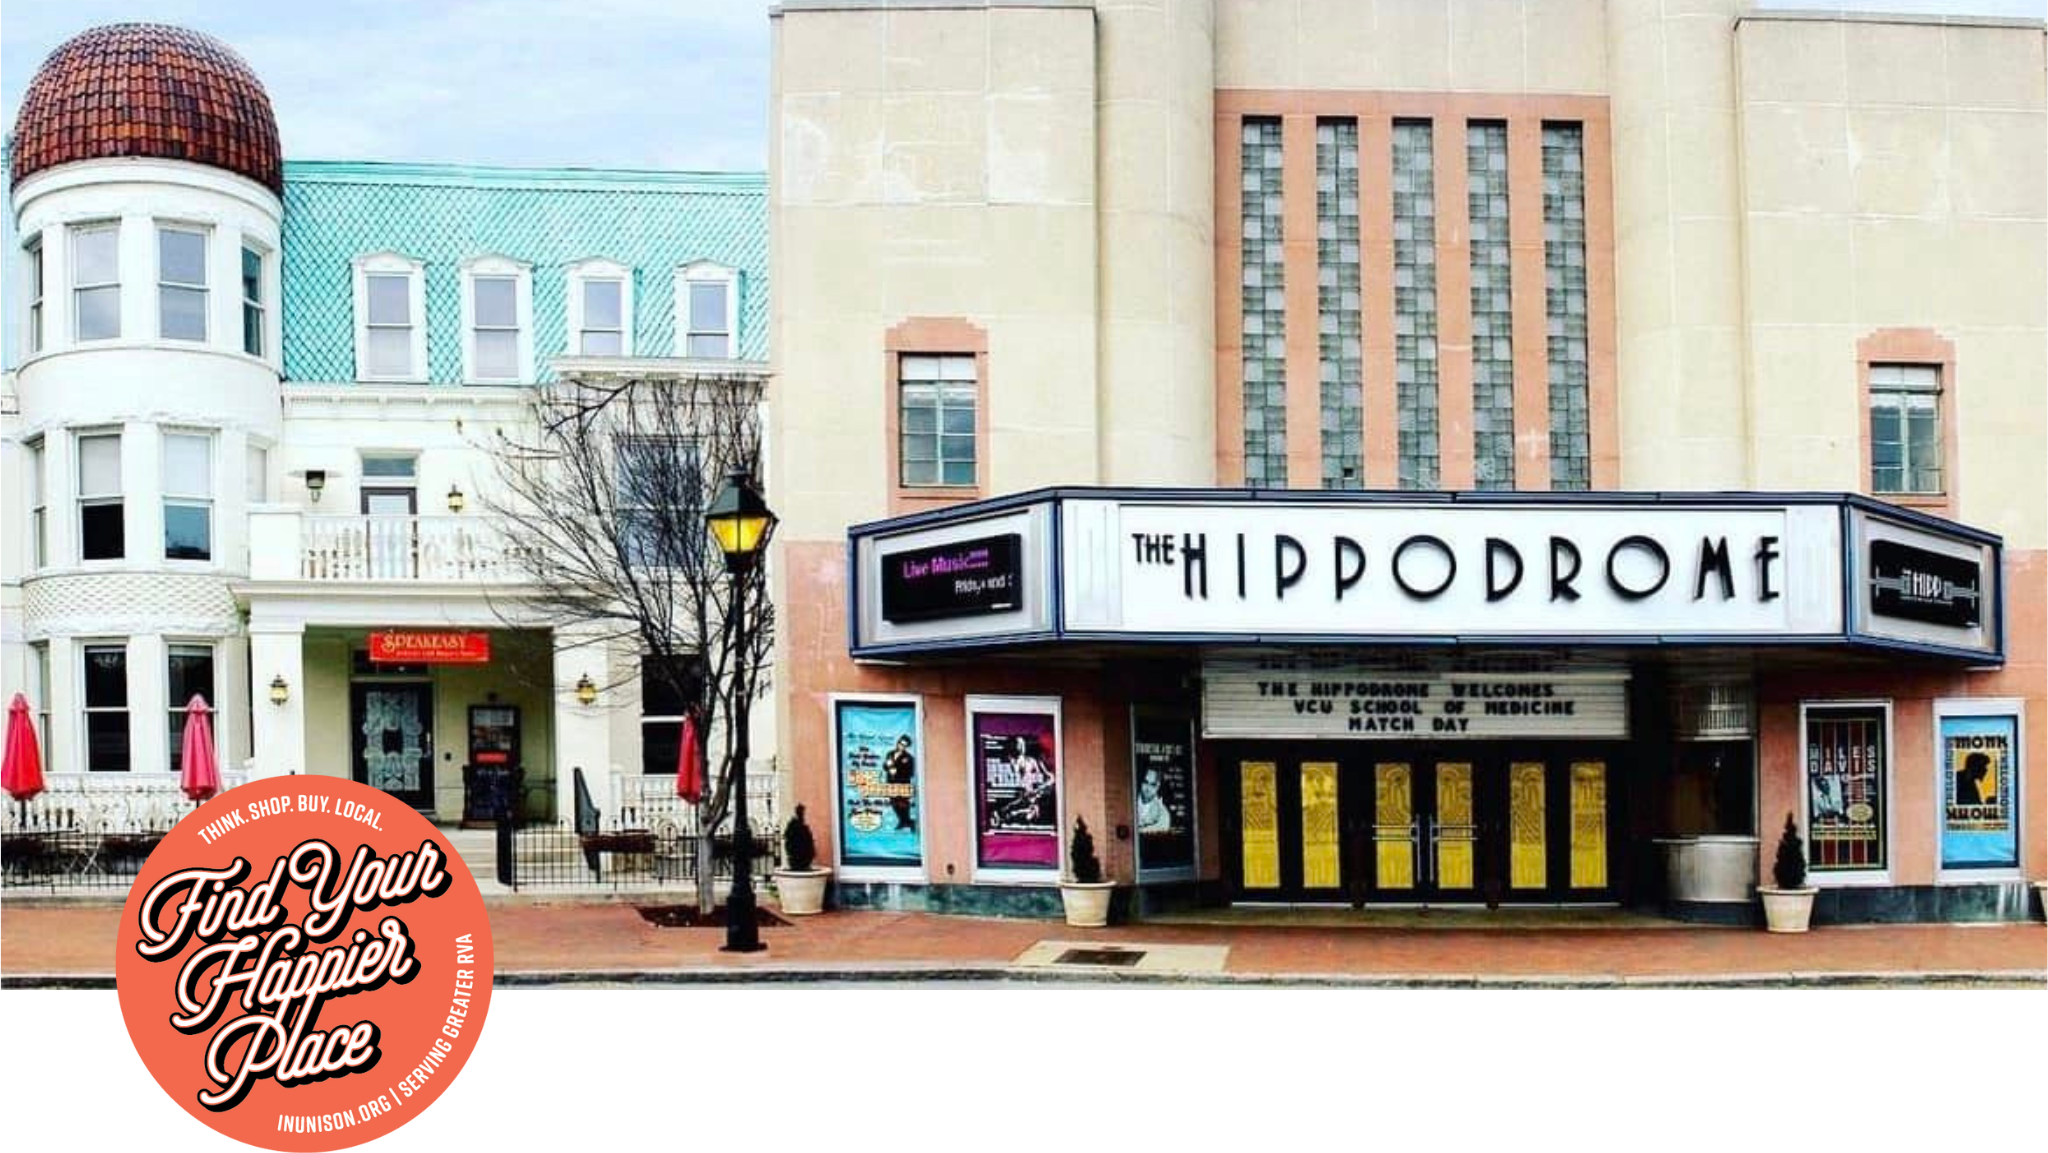 the hippodrome theater and street